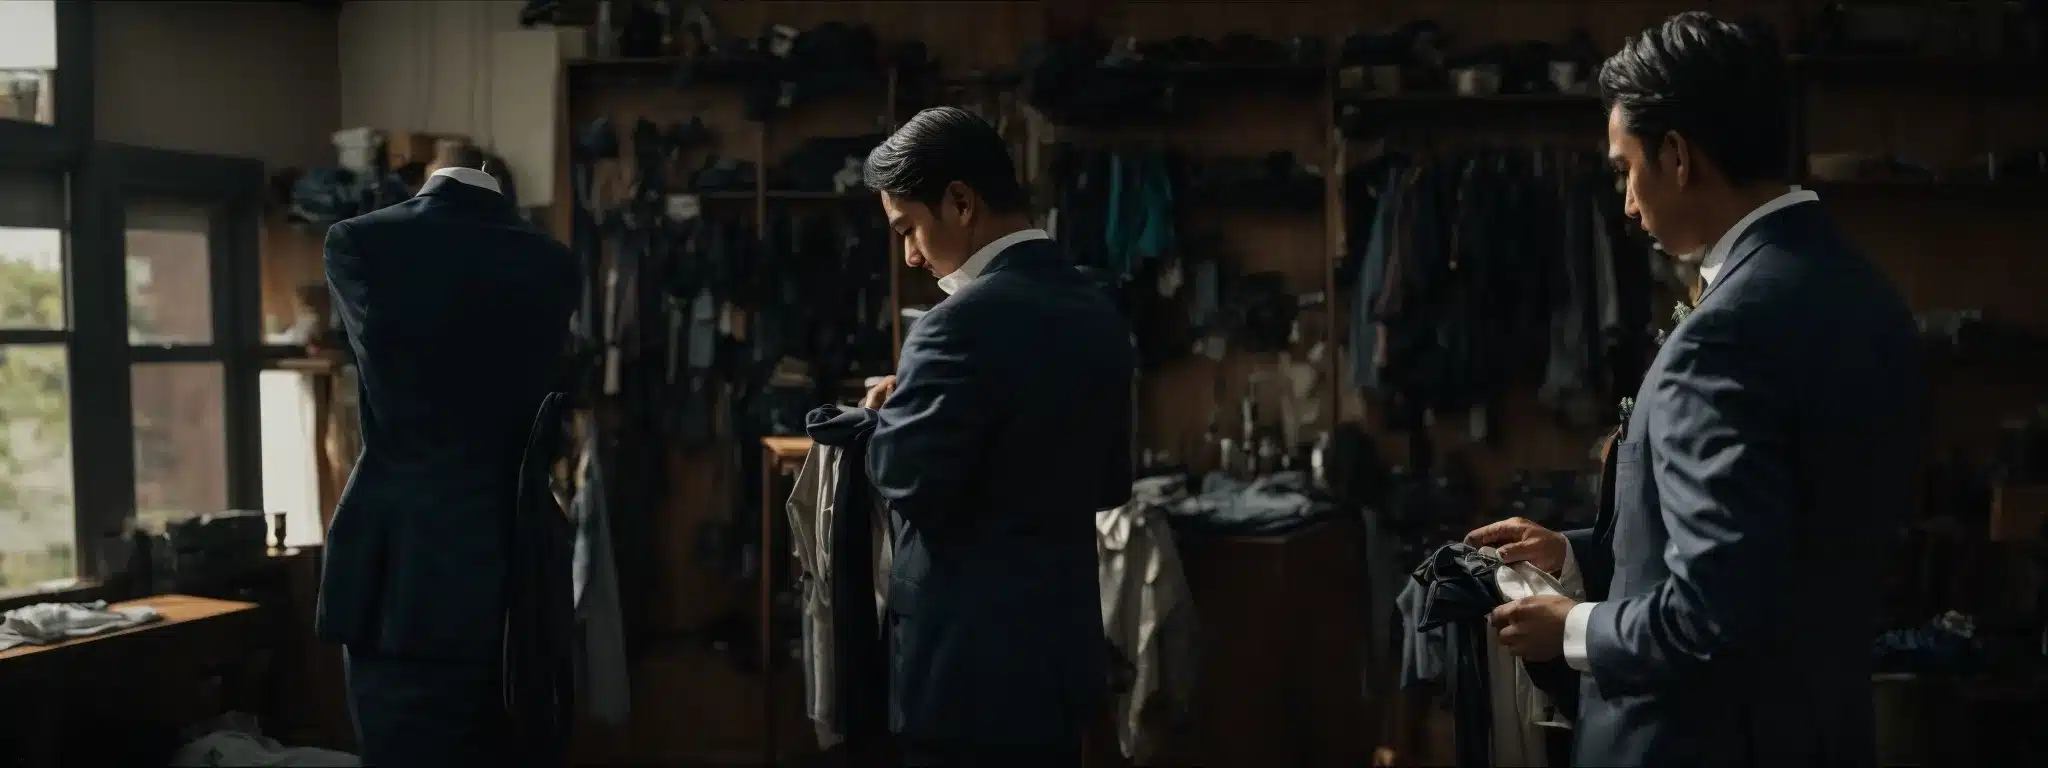 A Tailor Adjusts A Suit On A Mannequin In A Sunlit, Organized Workshop, Reflecting Careful Customization For Diverse Clientele.